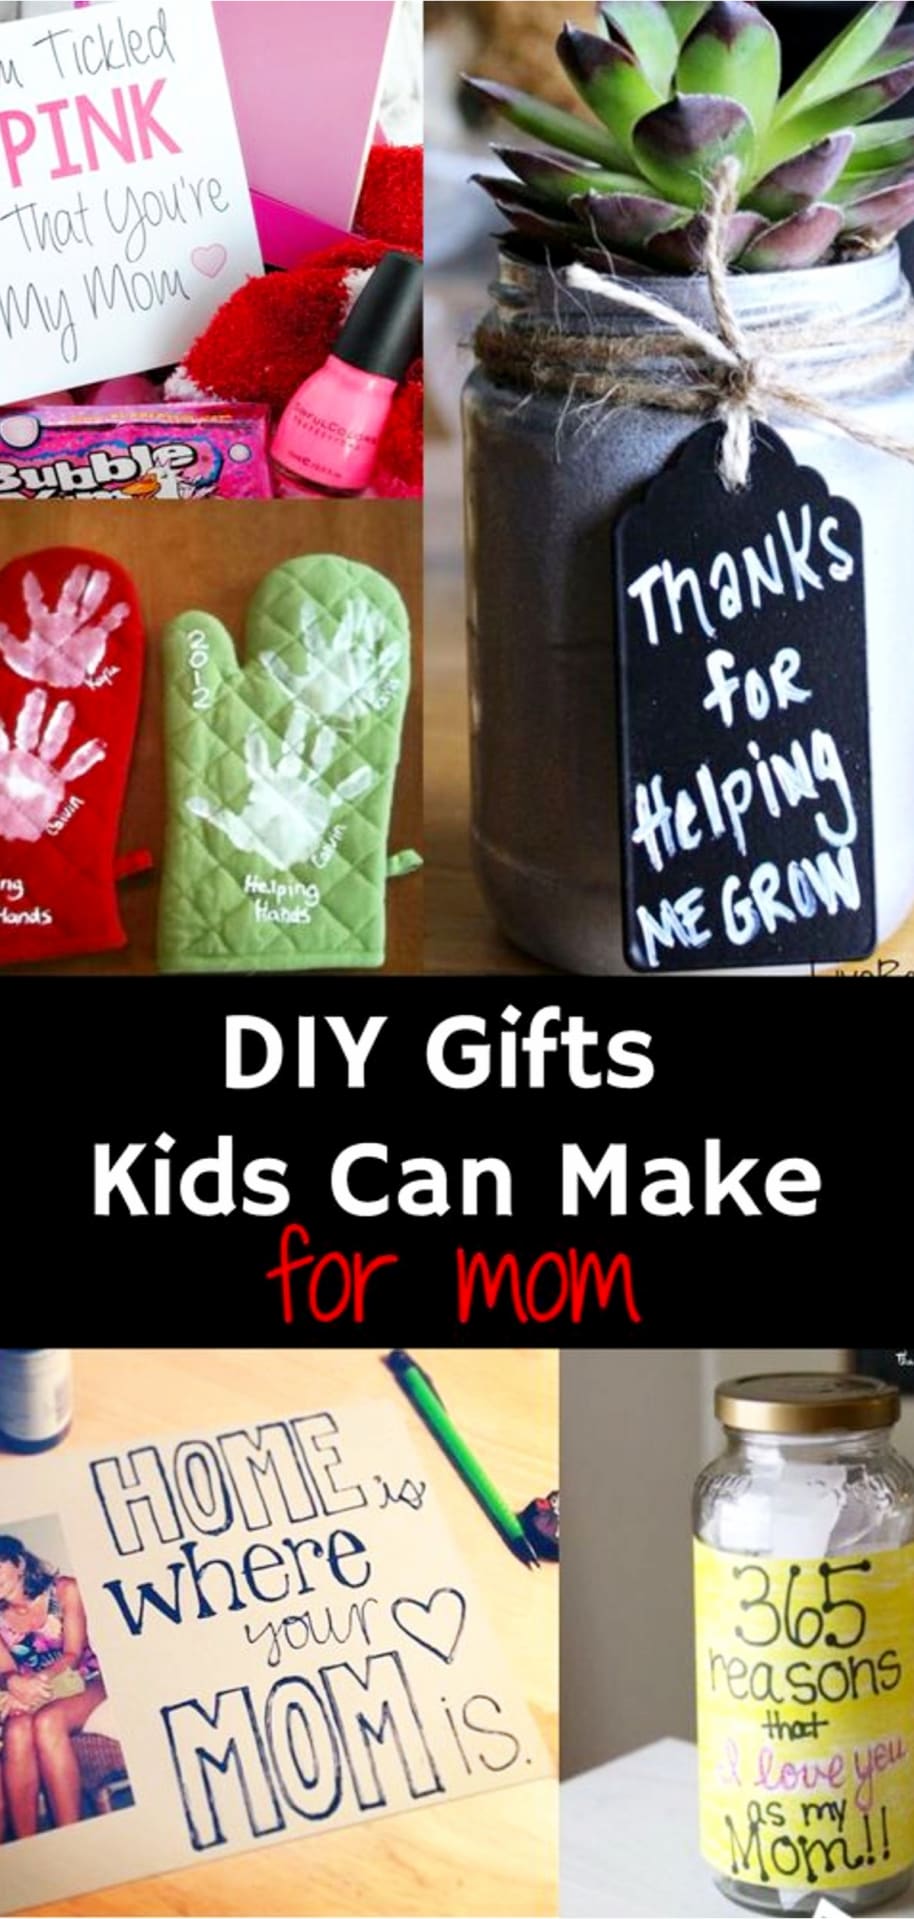 DIY gifts for mom kids can make and more Mothers Day crafts for kids